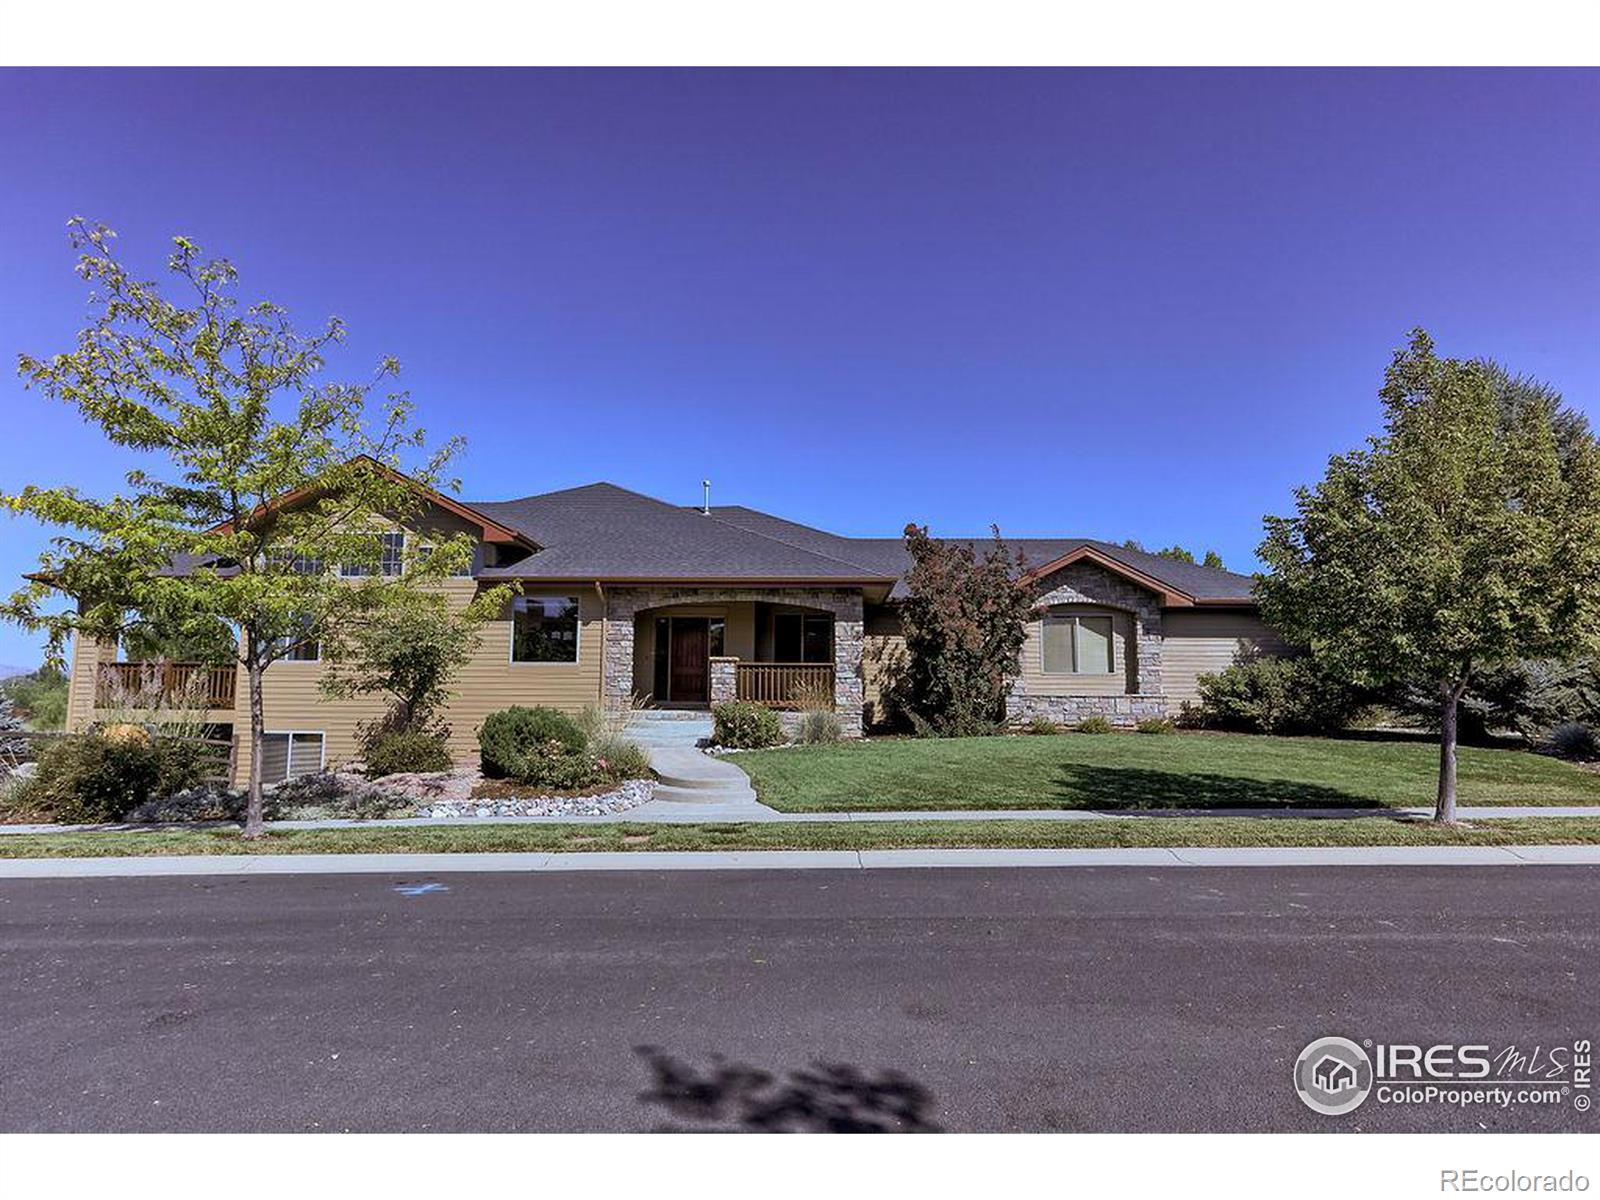 1114  turnstone lane, Fort Collins sold home. Closed on 2024-05-17 for $1,125,000.